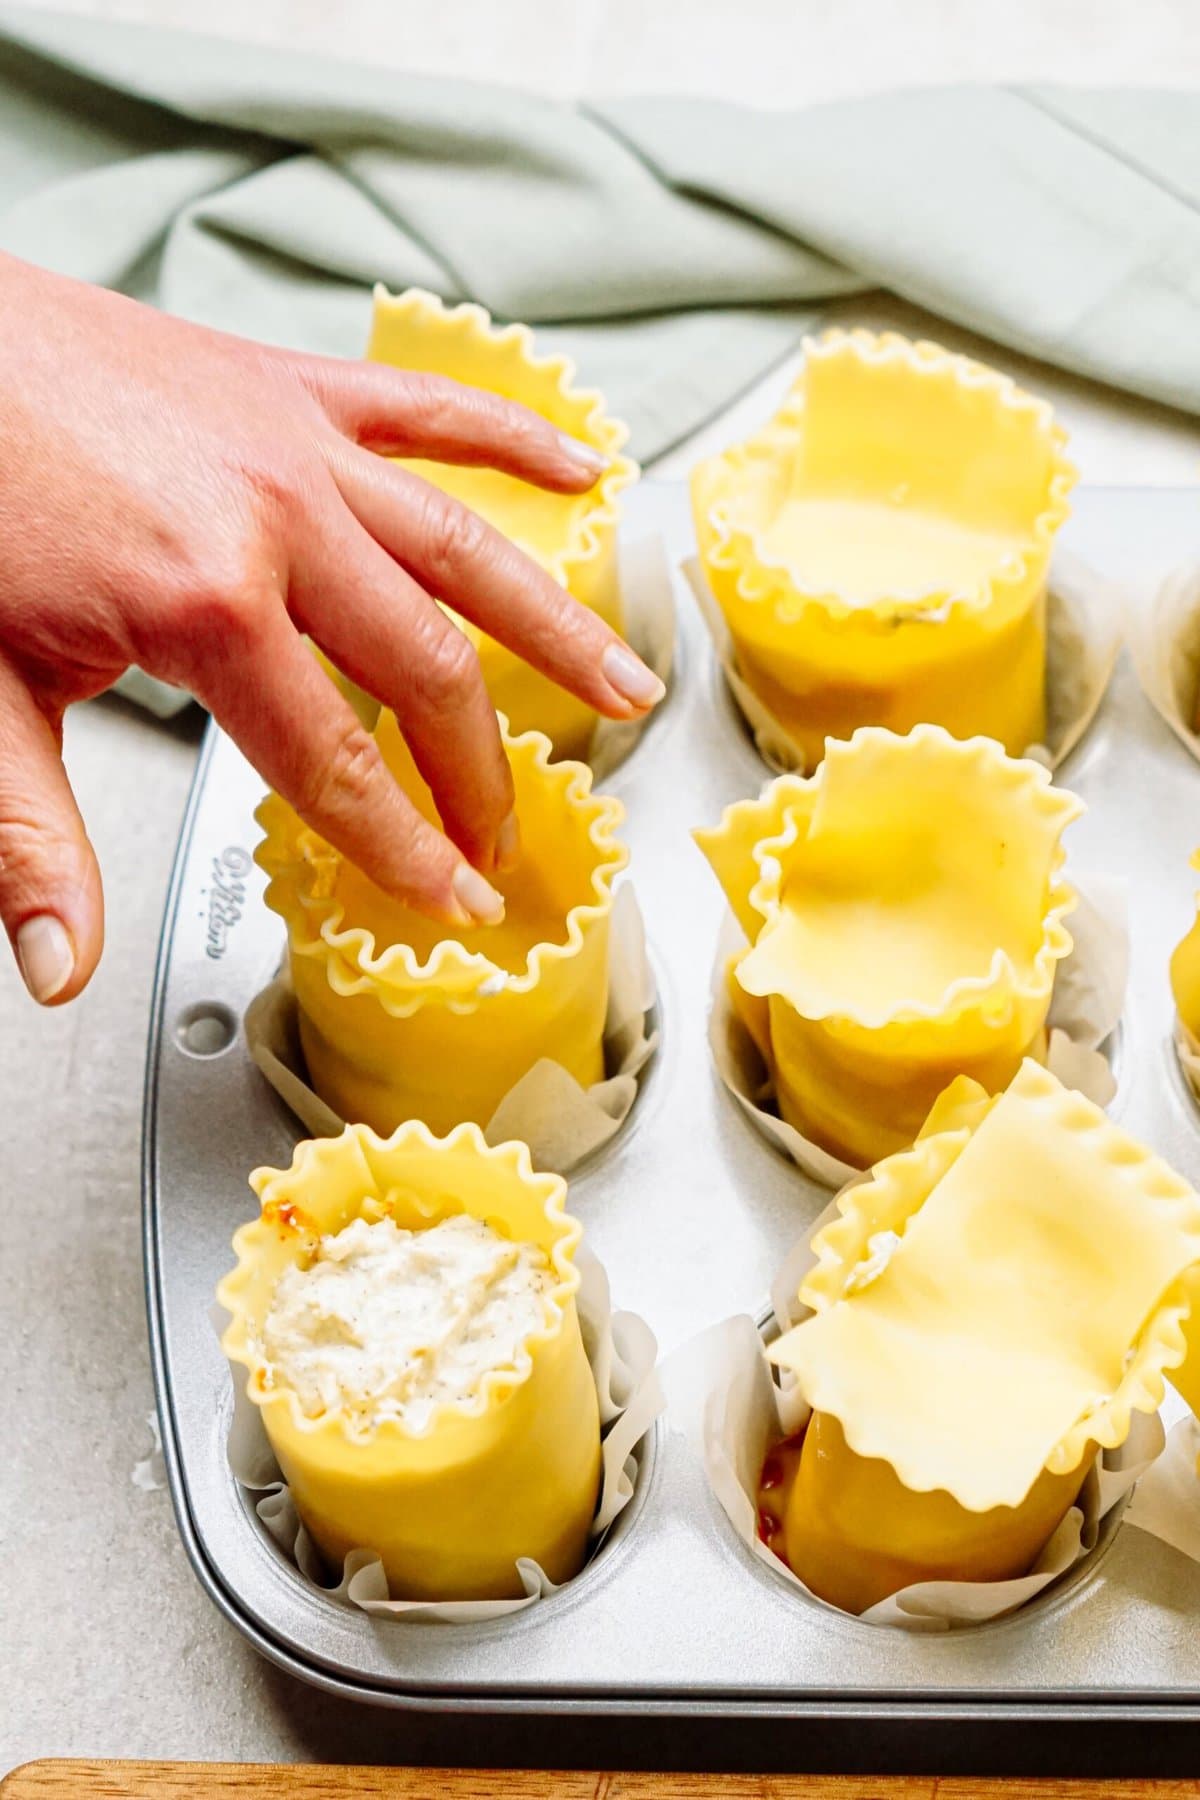 A hand arranges lasagna roll-ups in a muffin tray, each lined with parchment paper and filled with cheese mixture, creating delightful lasagna cups.